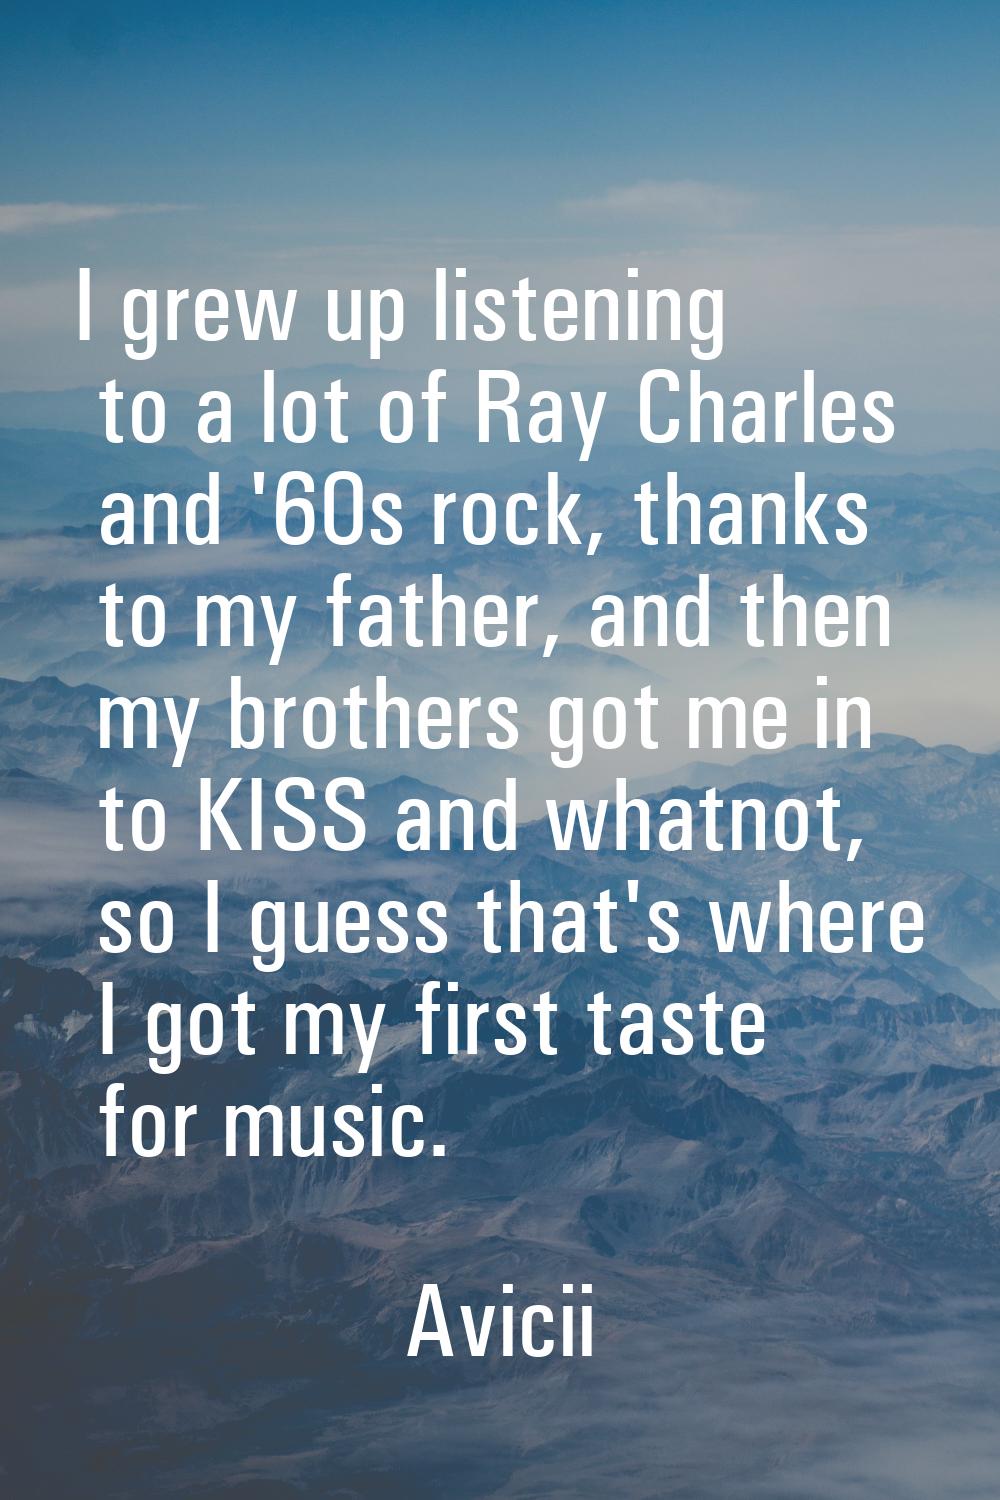 I grew up listening to a lot of Ray Charles and '60s rock, thanks to my father, and then my brother